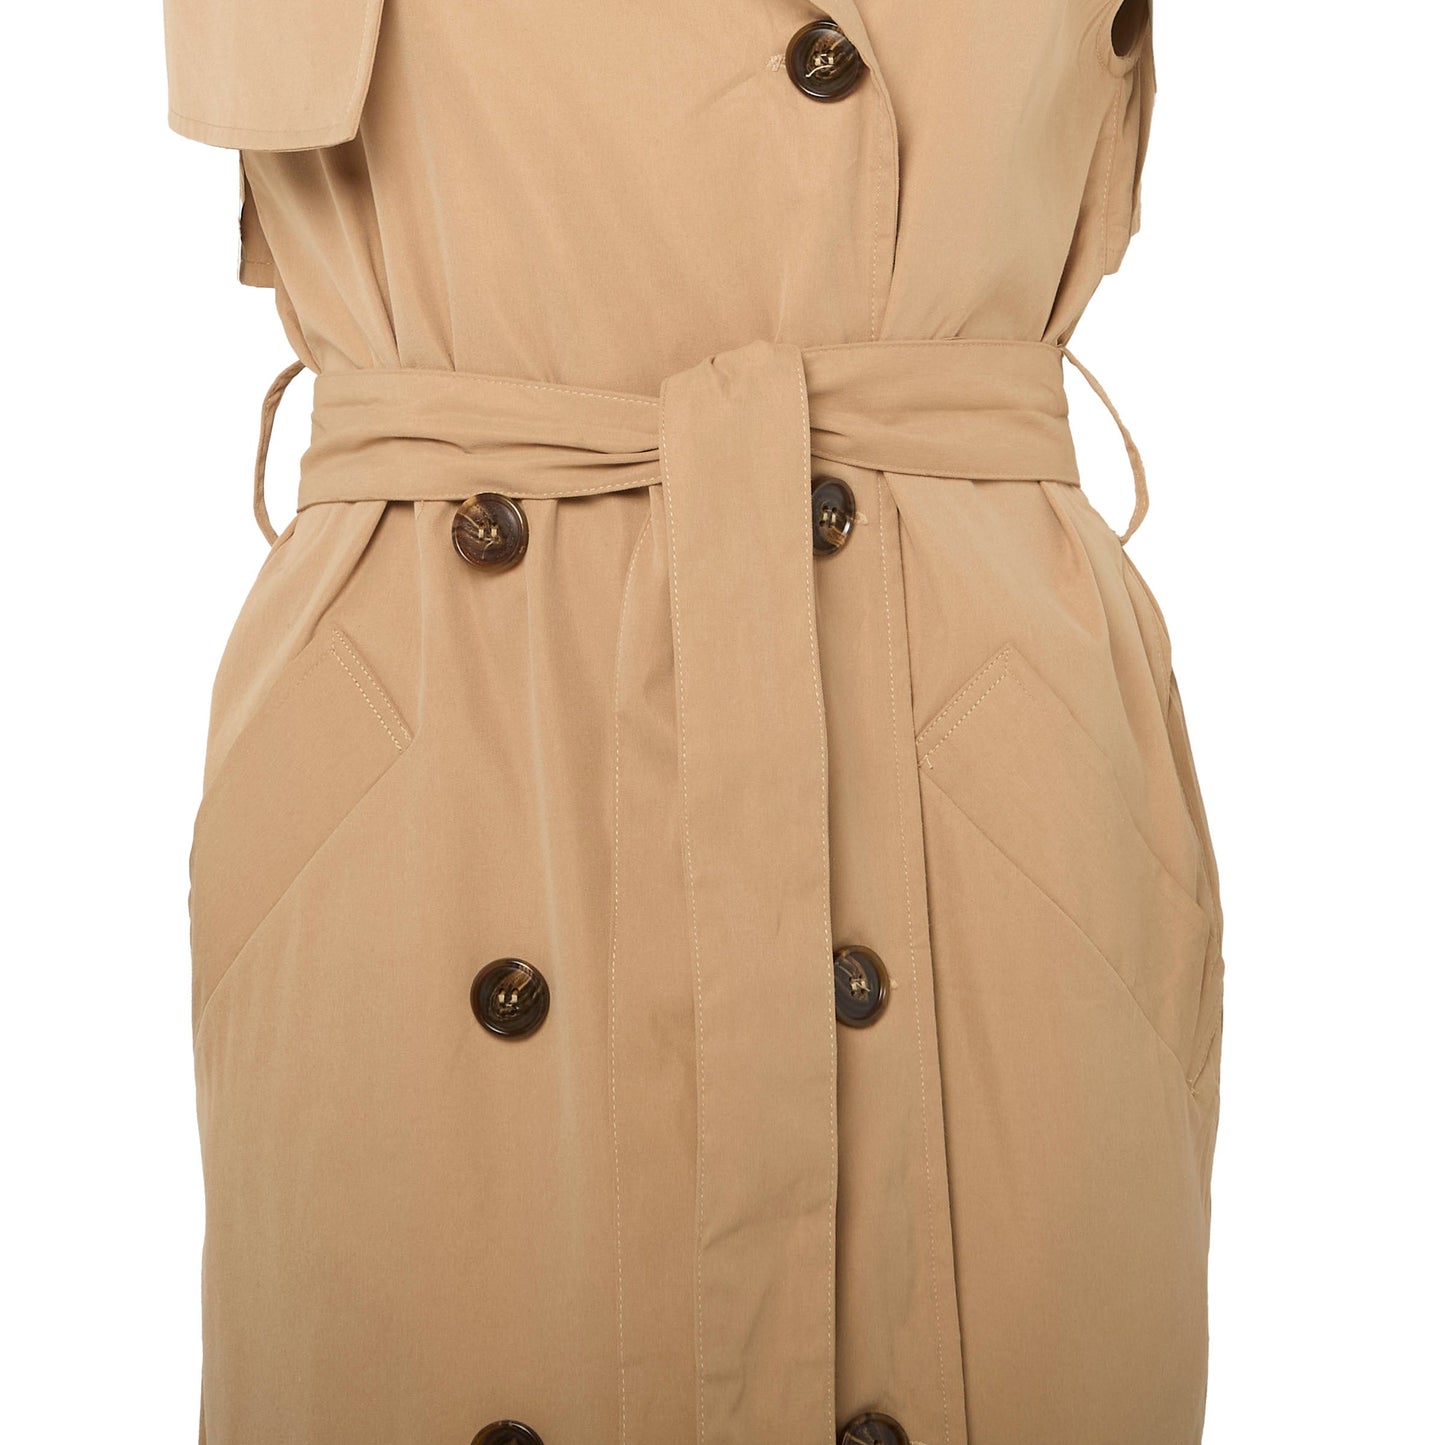 Unbranded Sleeveless Trench Coat - L